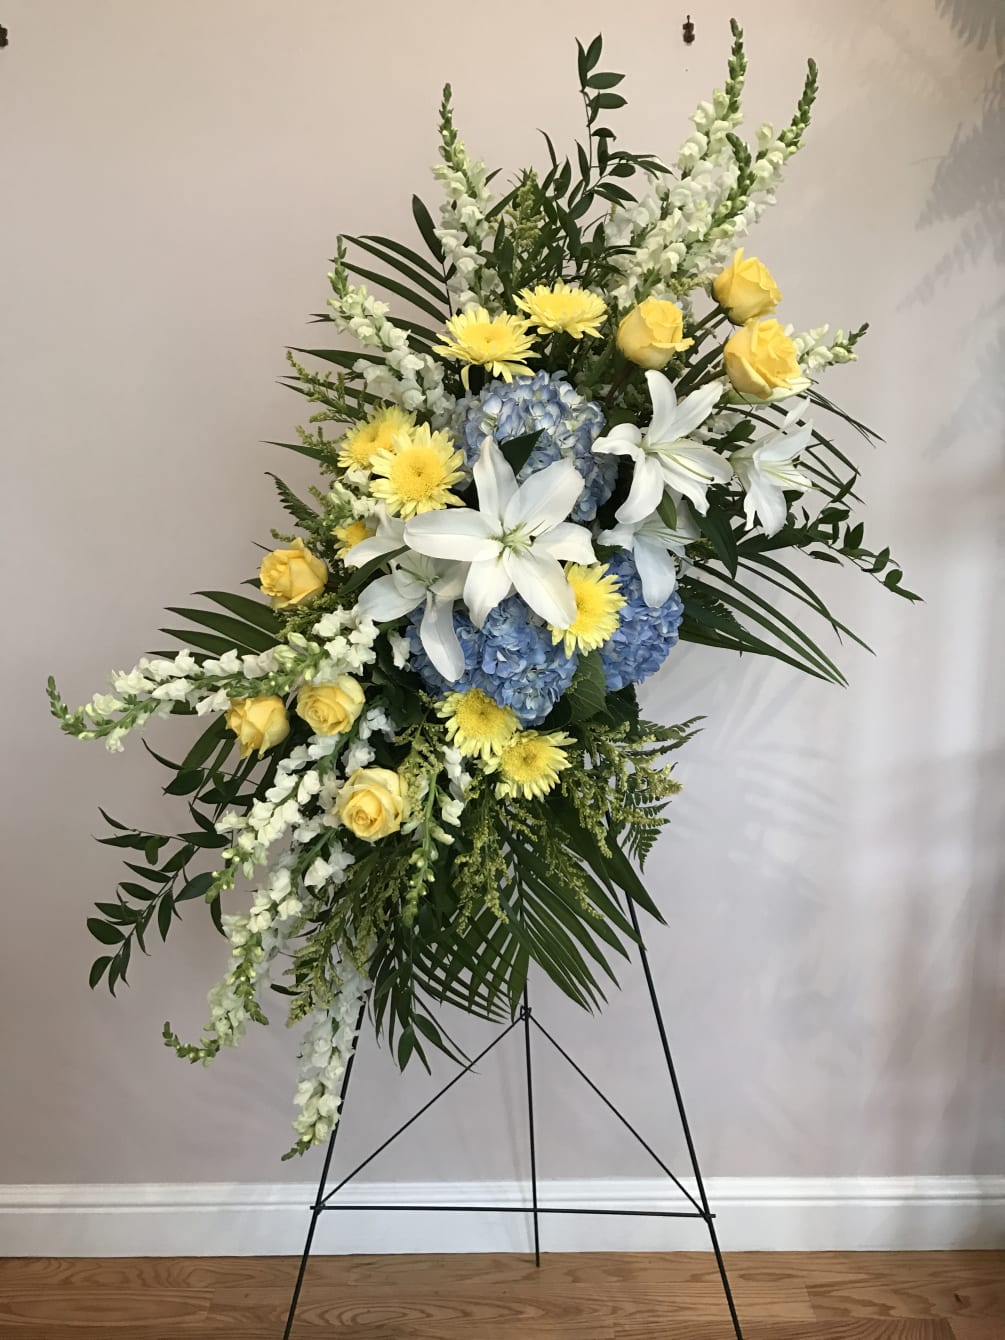 Blue hydrangea, yellow rose, white lily and more designed for a funeral